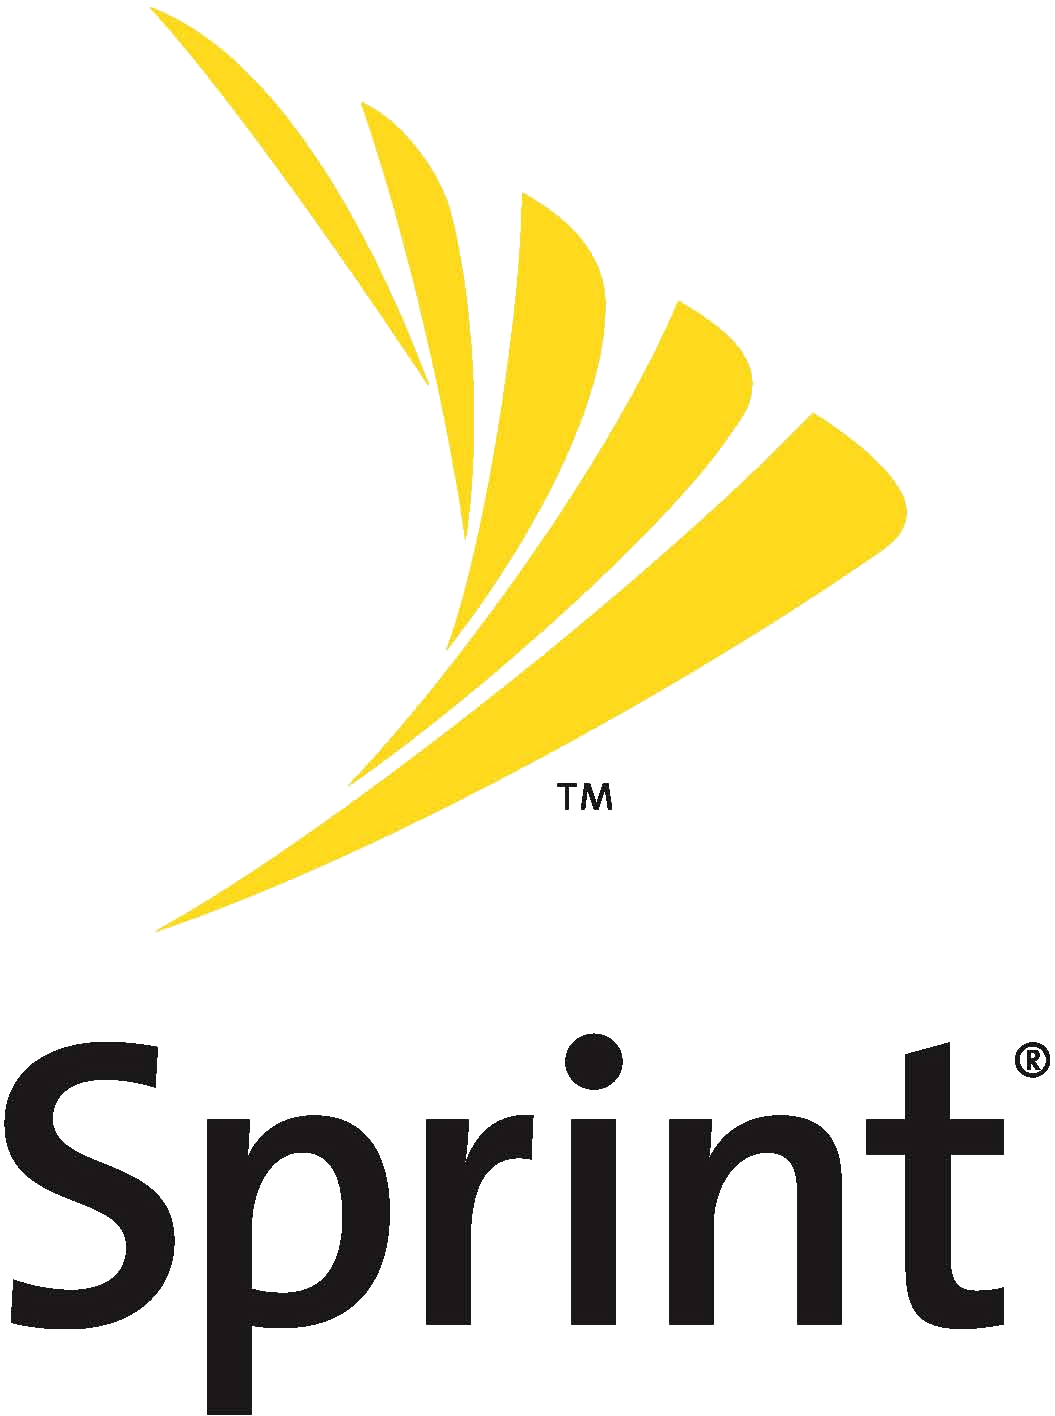 Sprint Rolls Out 4G LTE in Four More Cities